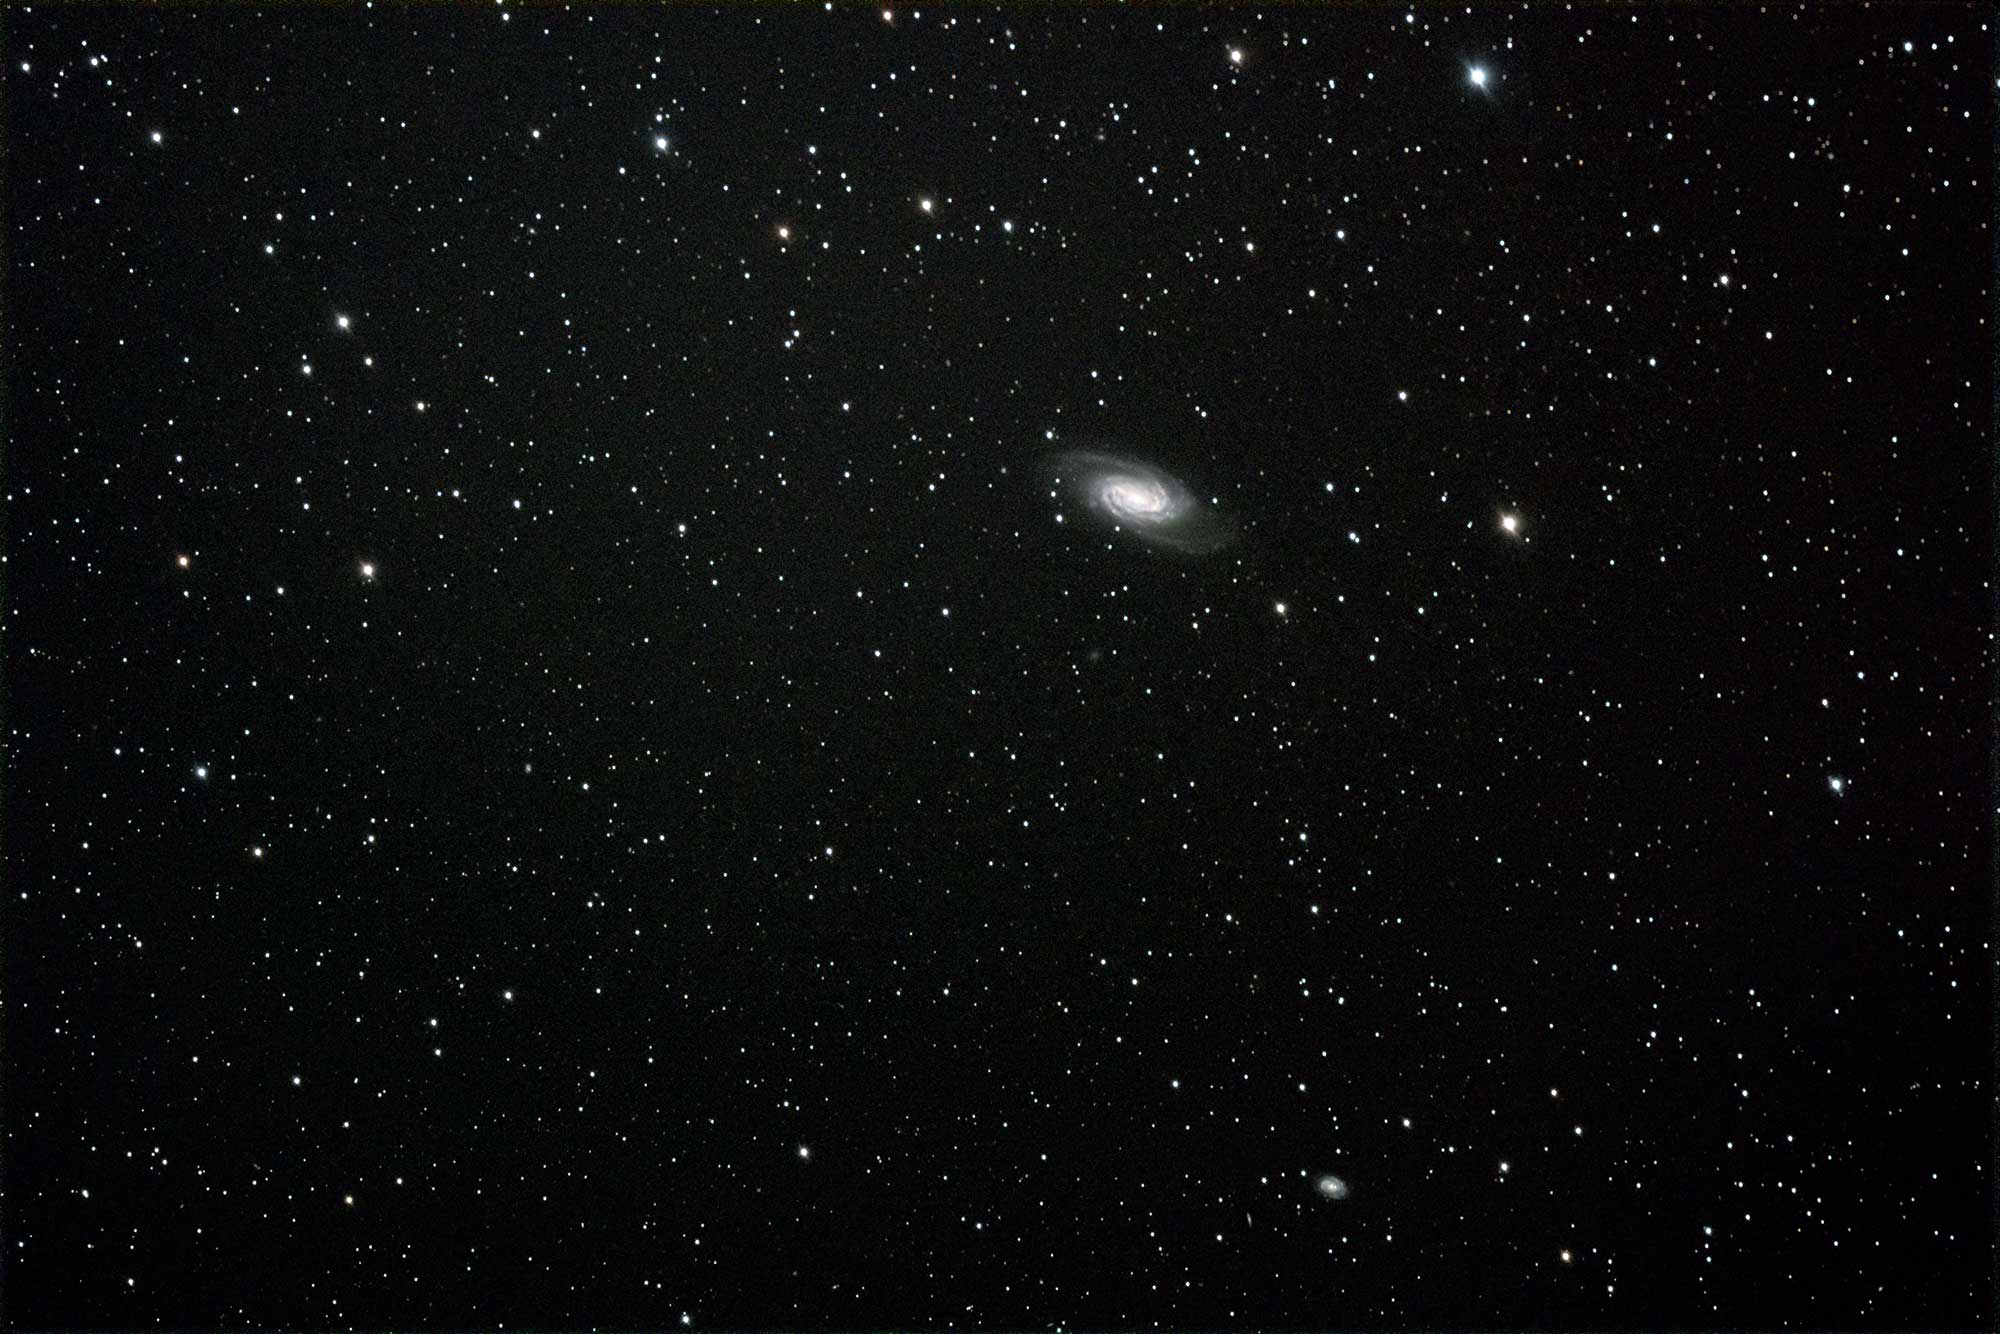 NGC2903 astrophotography with RASA8 and ASI183MC: 12 minutes total integration time